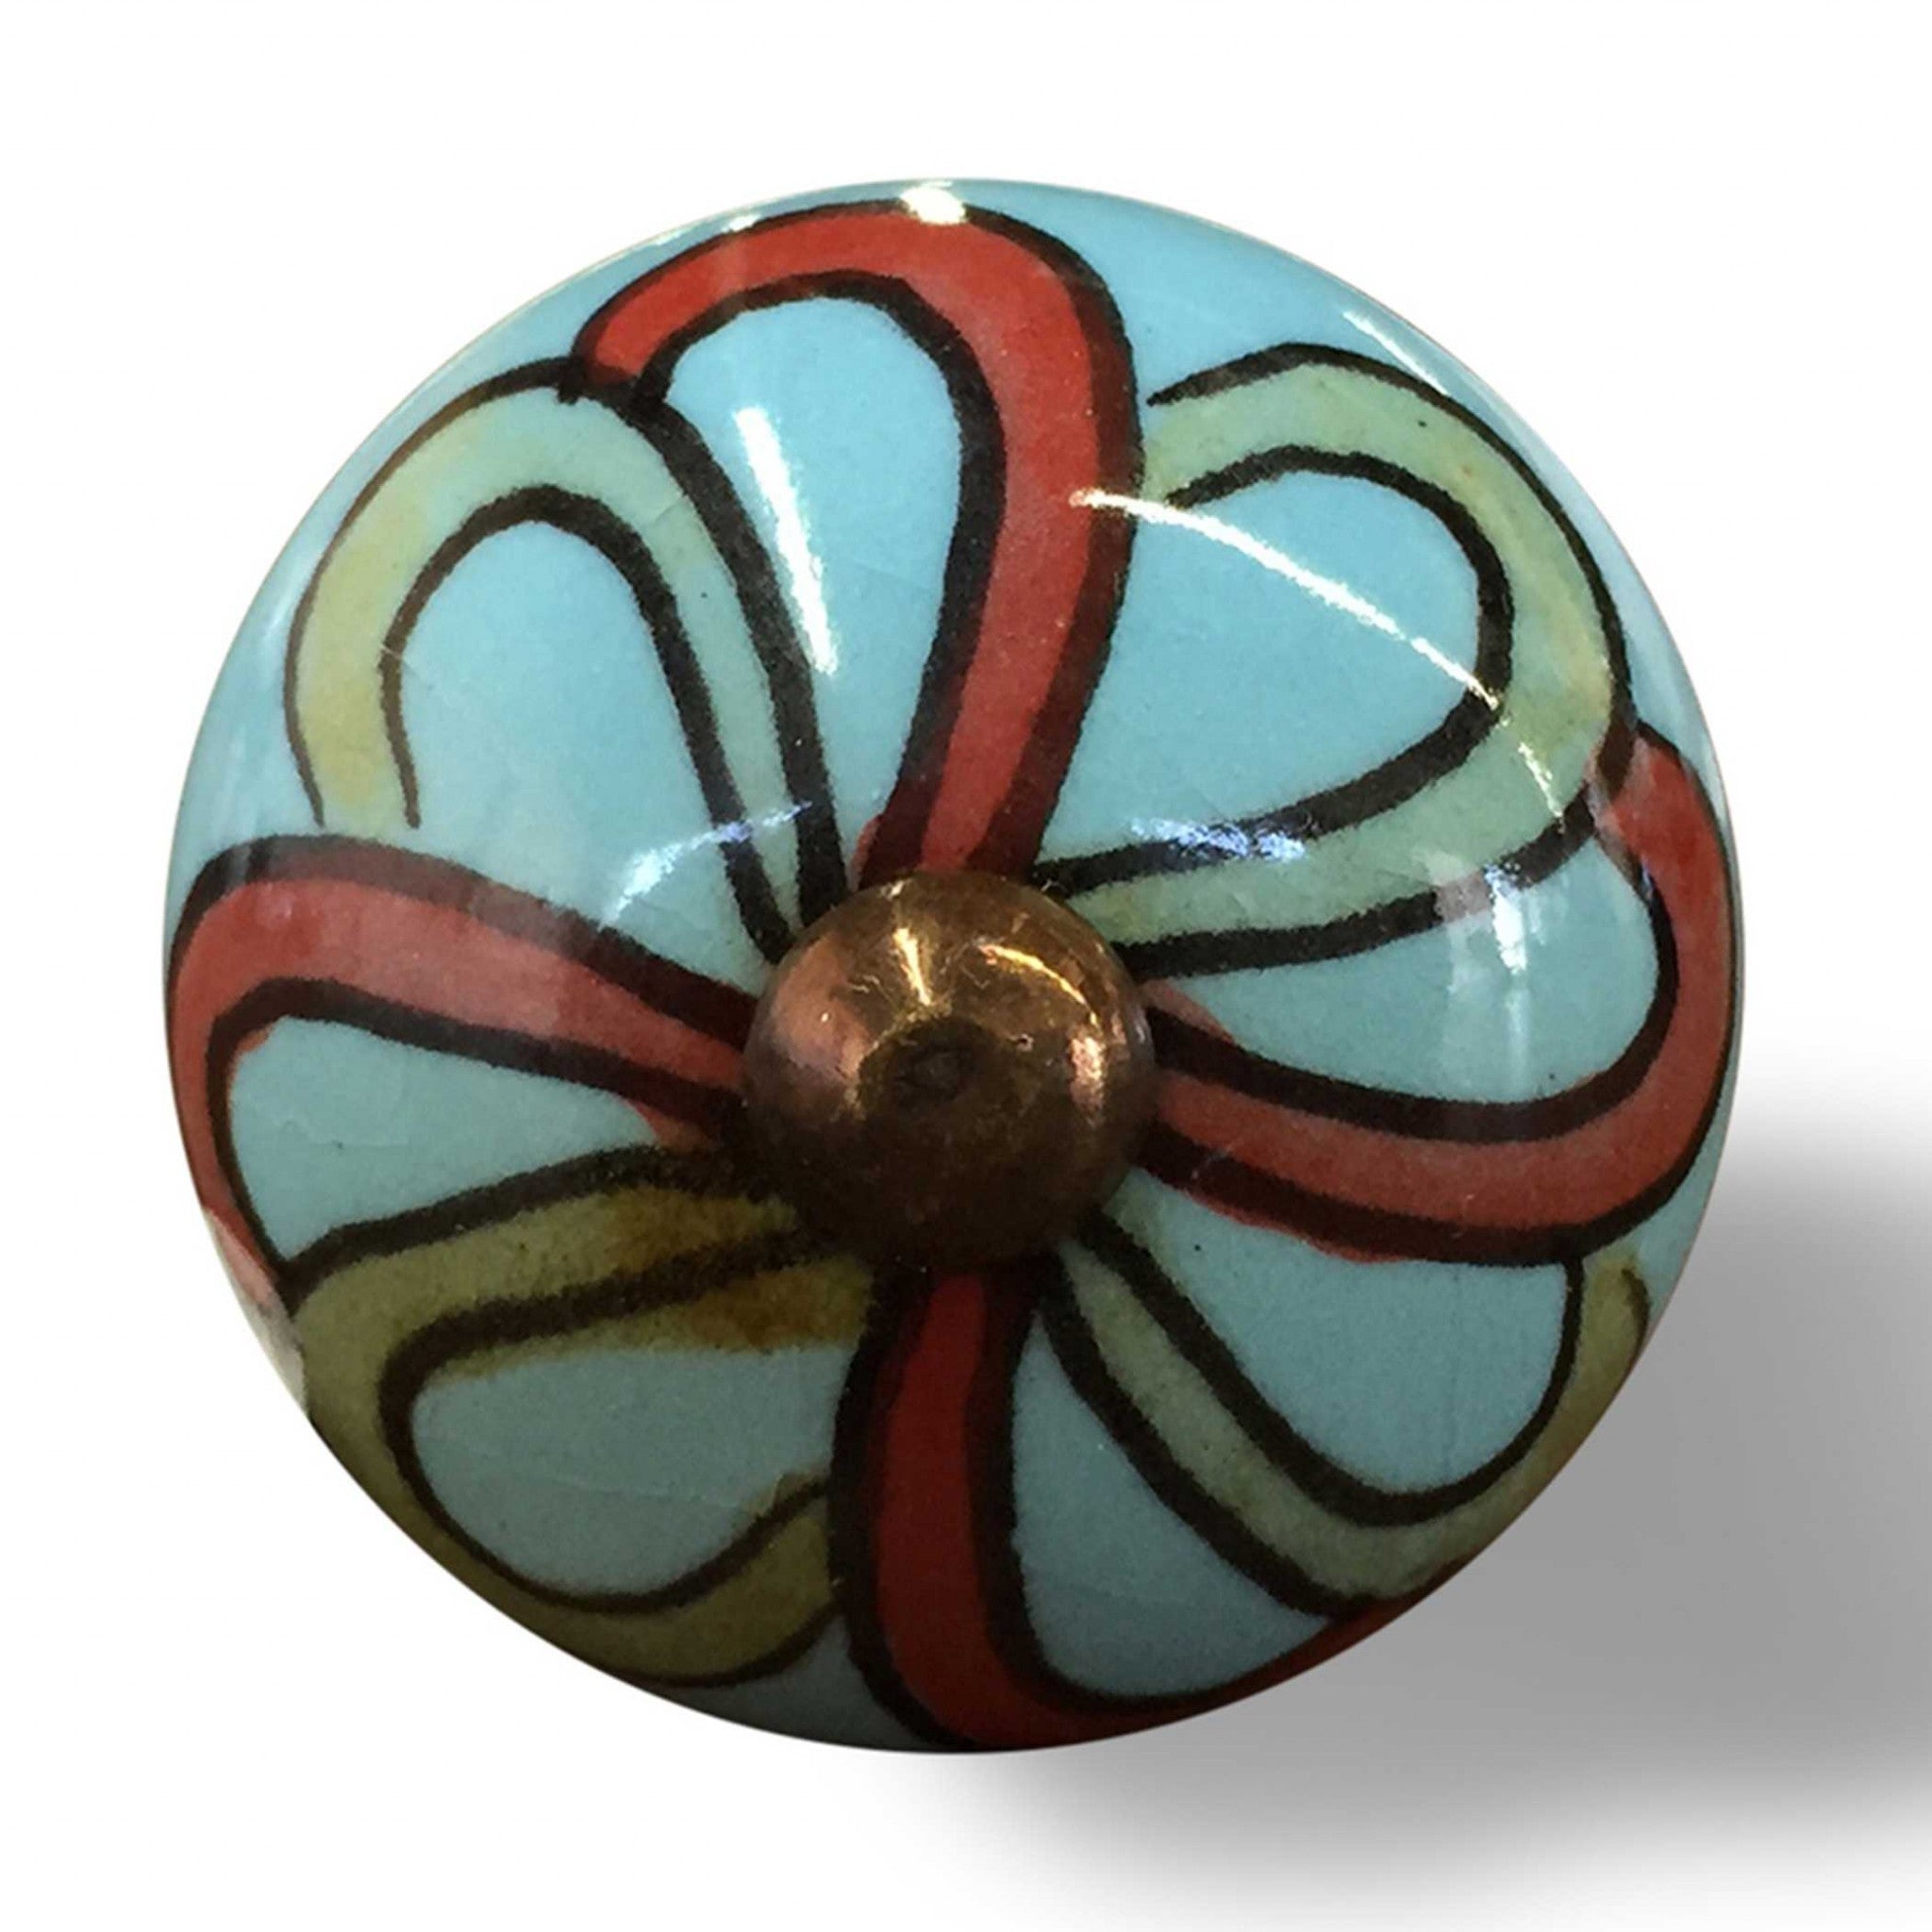 Bohemian Floral Turquoise Handprinted Set Of 8 Ceramic Knobs